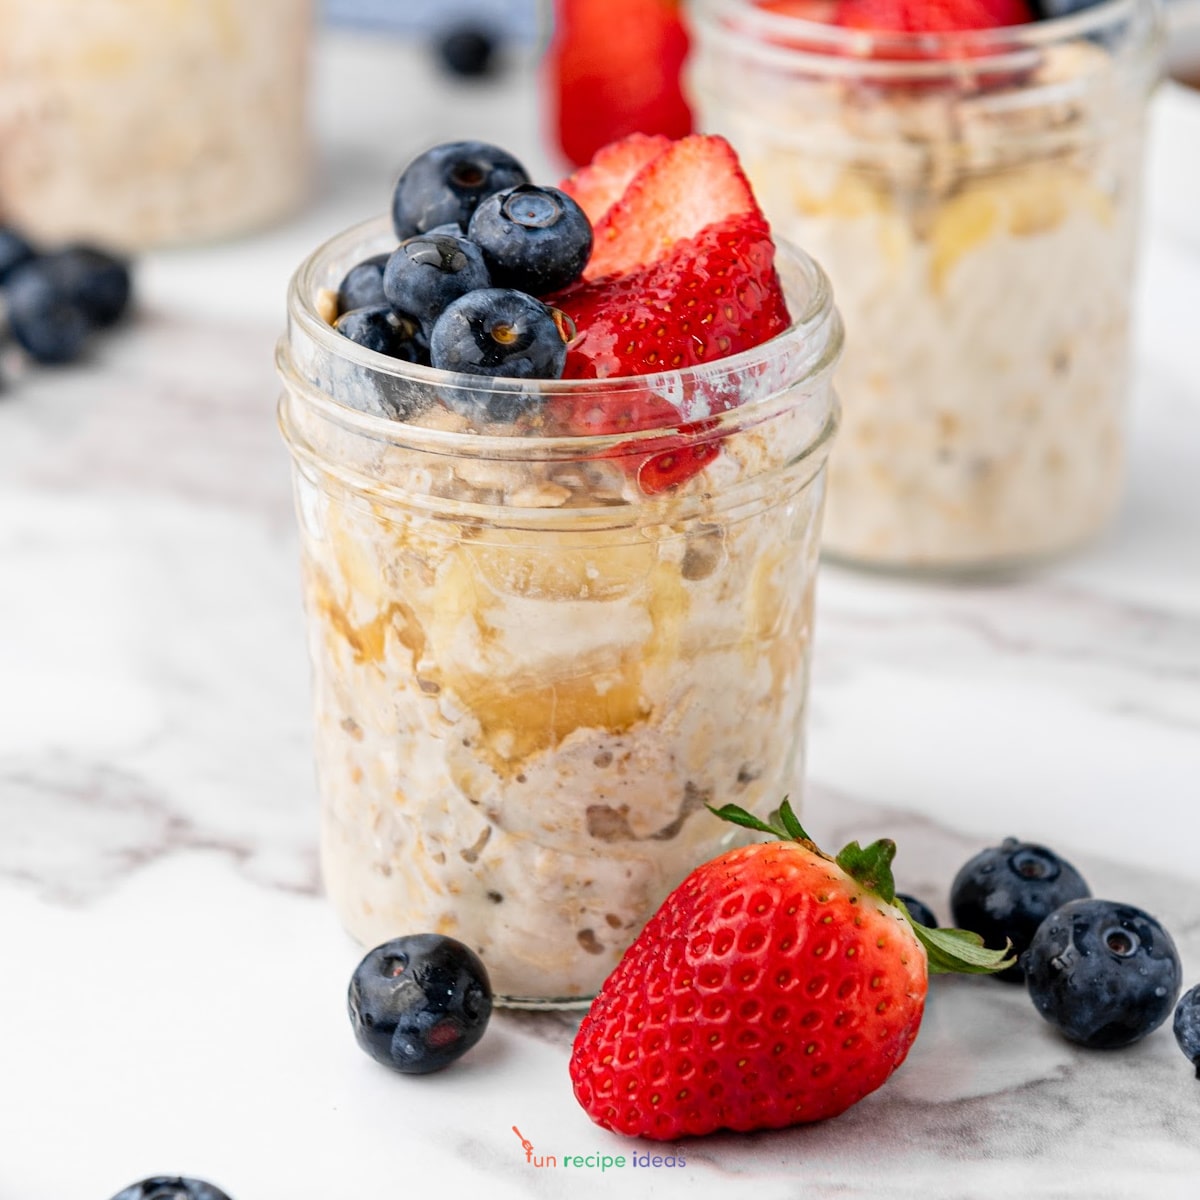 overnight oats in a jar with strawberry and blueberry garnishes.